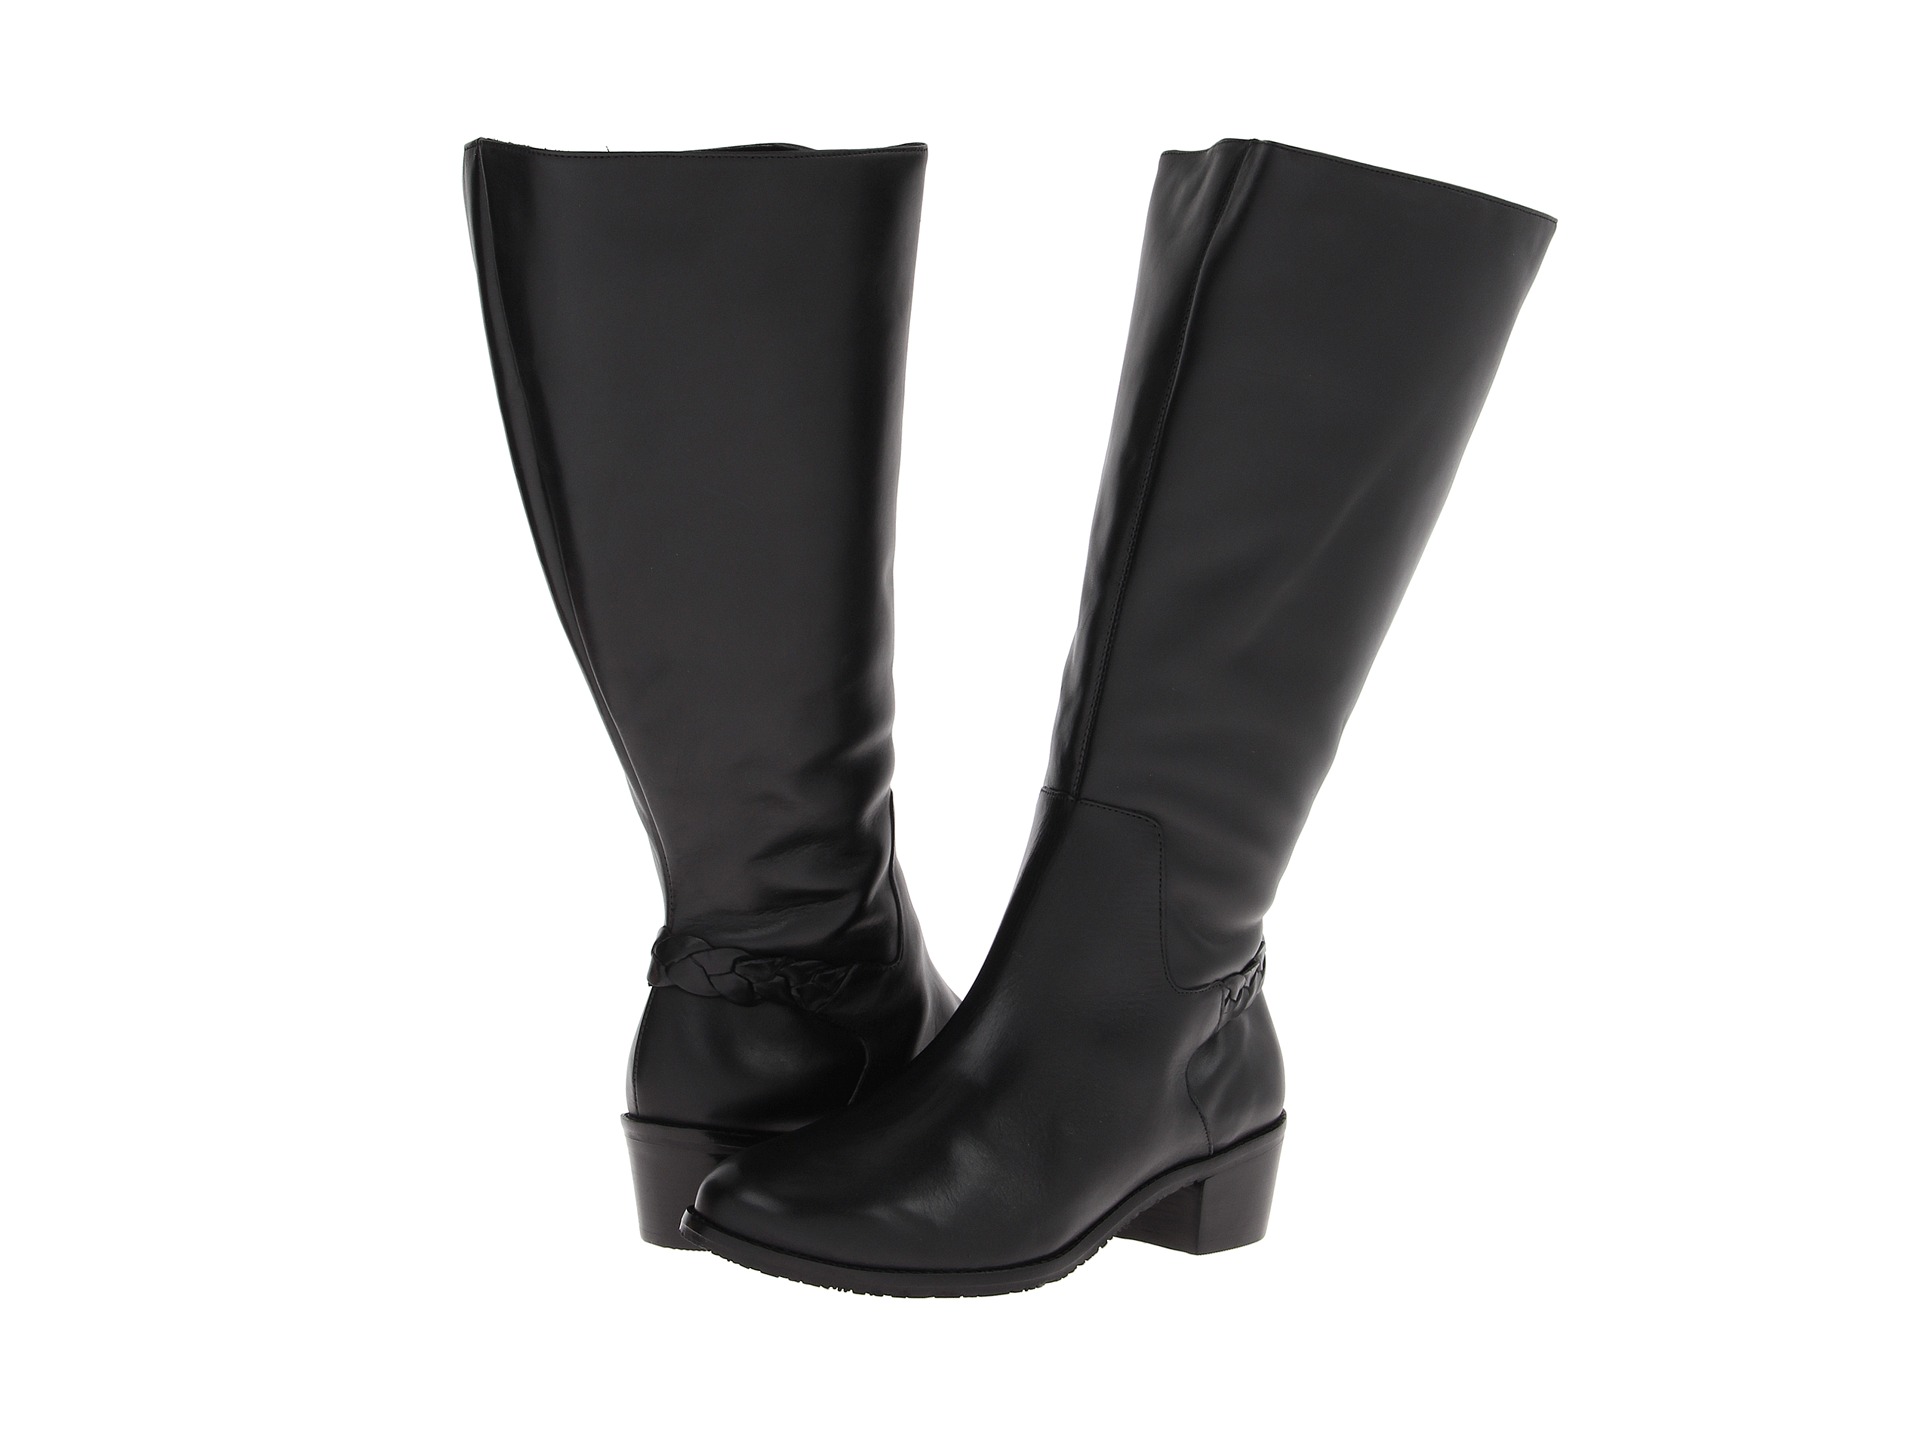 Rose Petals Women&#39;s Curly Wide Calf Leather Riding Boot Black - $146.99 : Slim and Skinny Calf ...